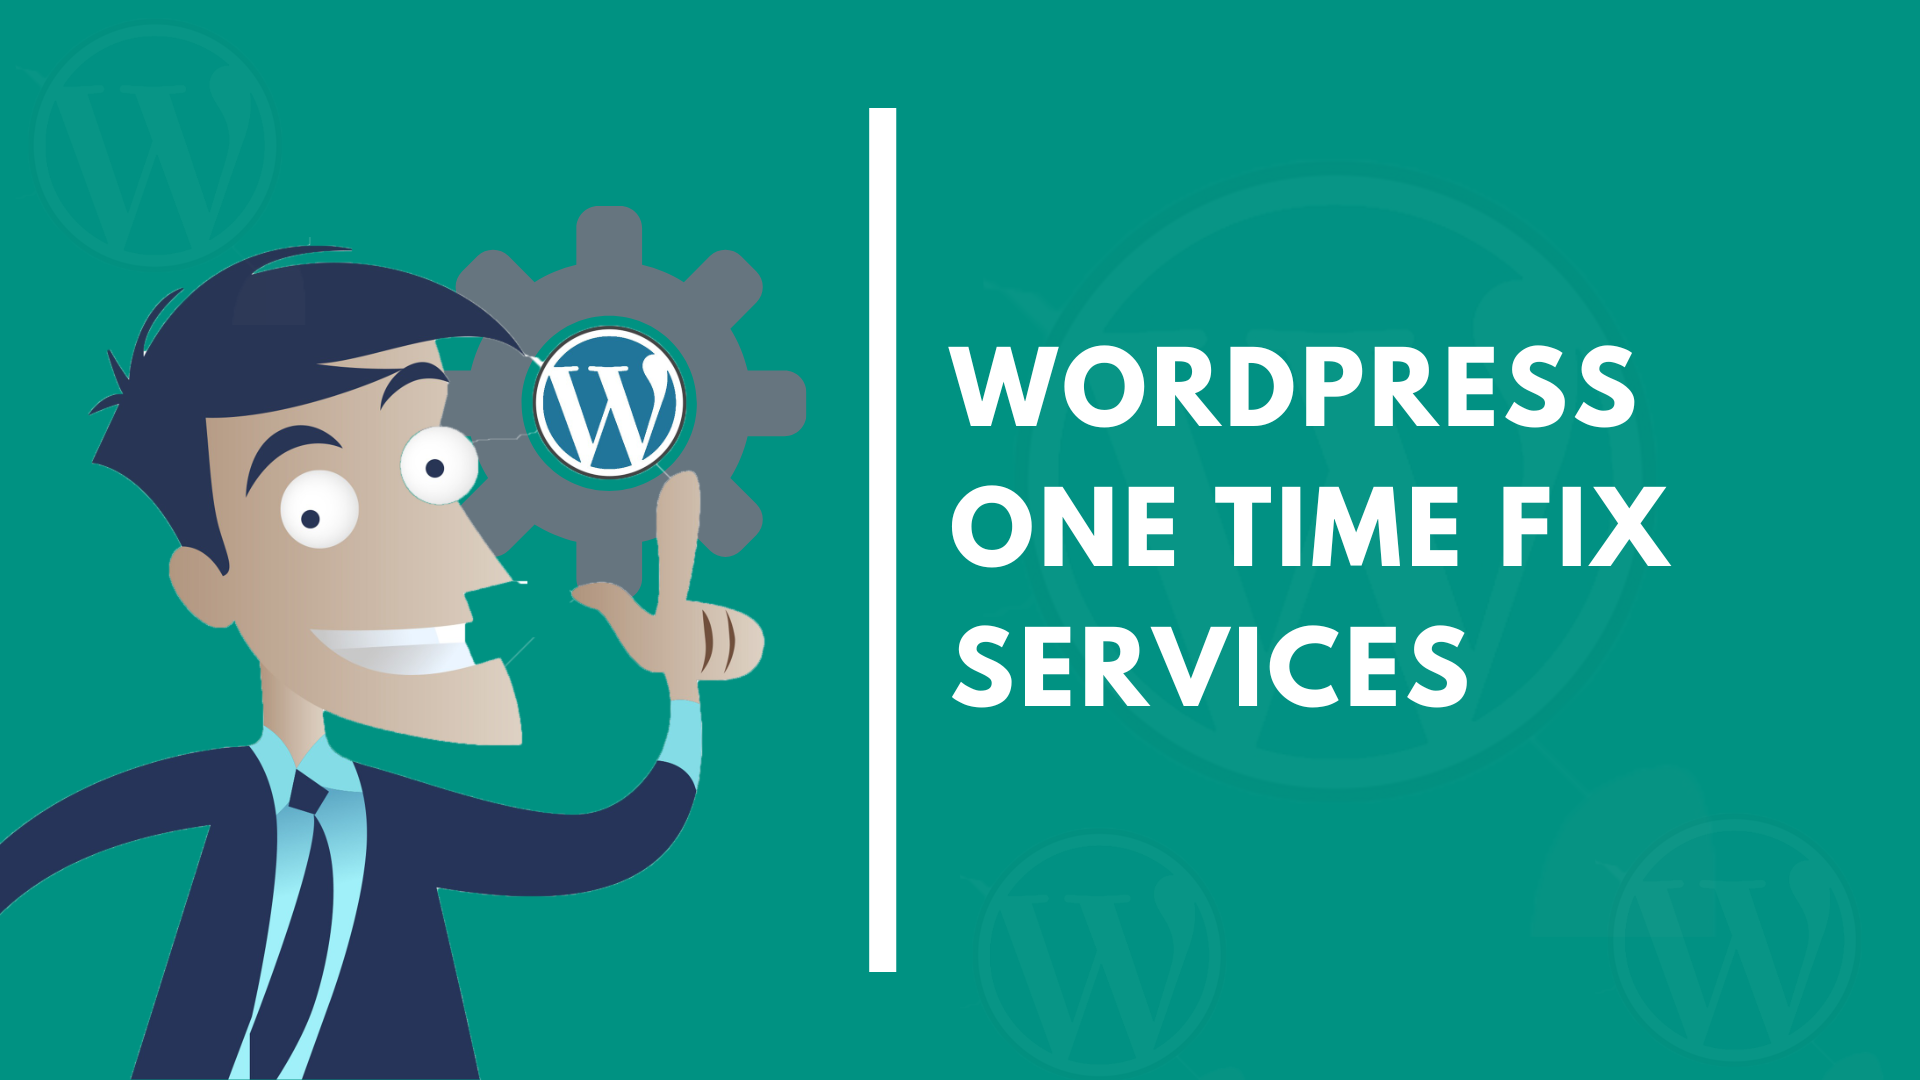 Are you looking for WordPress One Time Fix Services?